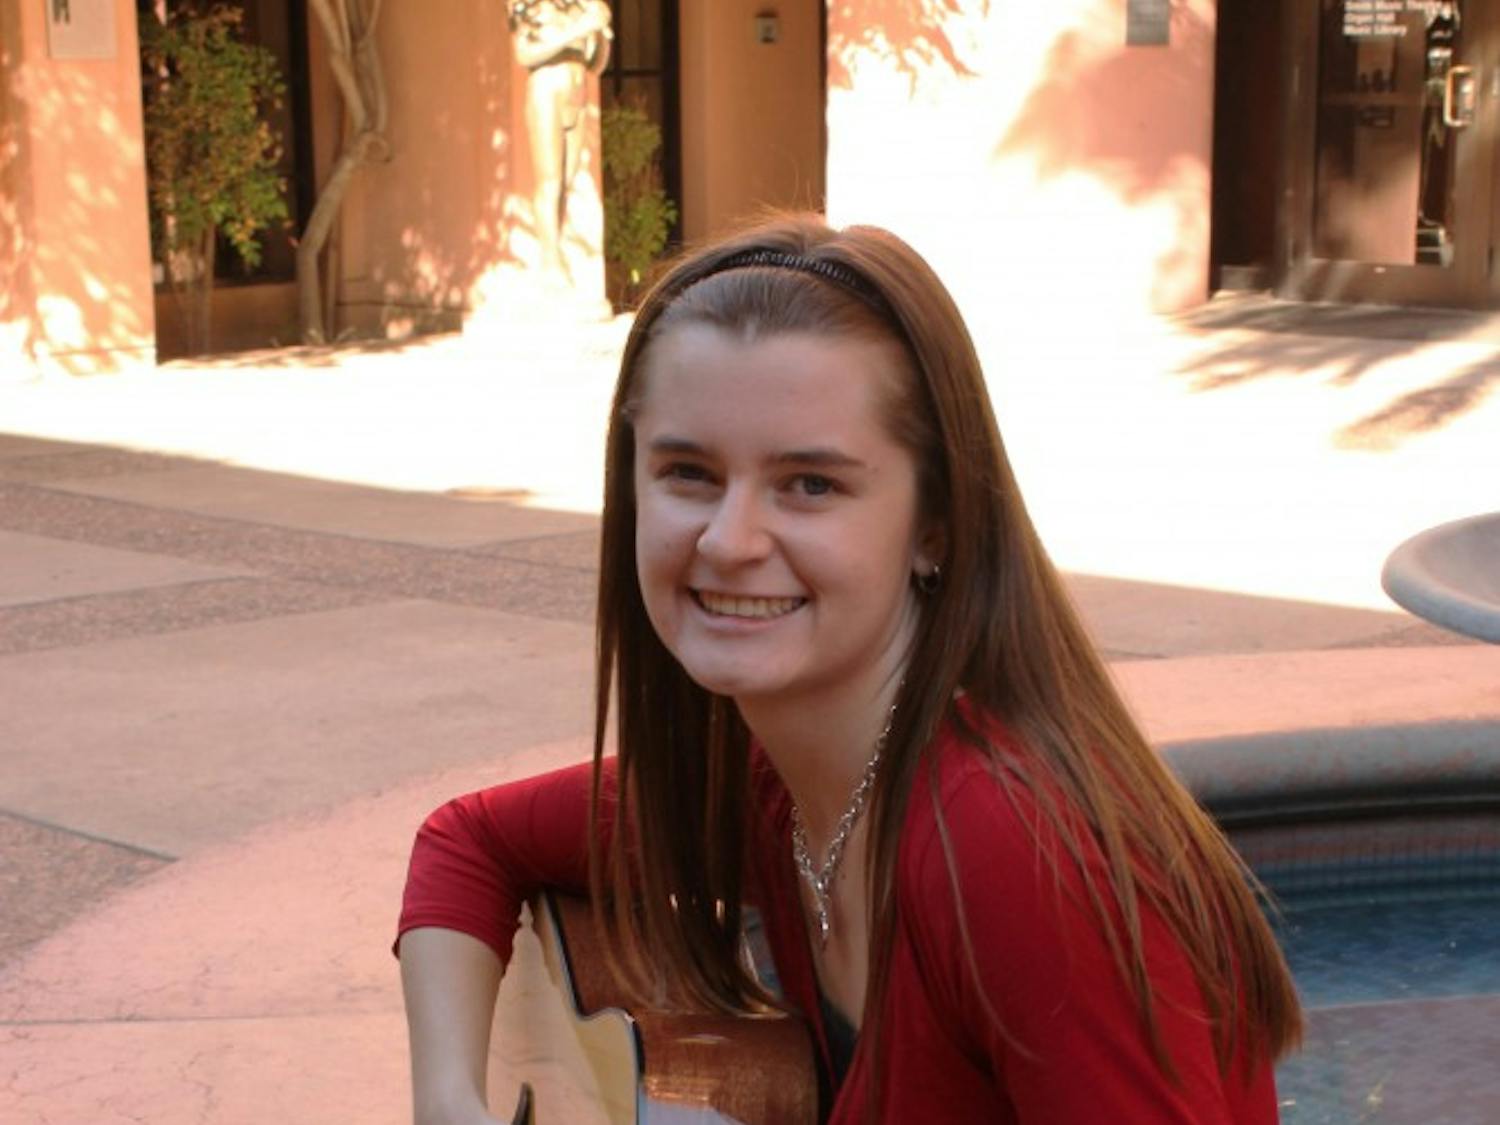 Shelbe Olson, music therapy major and sophomore, practices her guitar in the music building at ASU. Olson, along with other music therapy majors, are required to learn the basics of guitar and other musical instruments for their field of study. (Photo by Laura Davis)